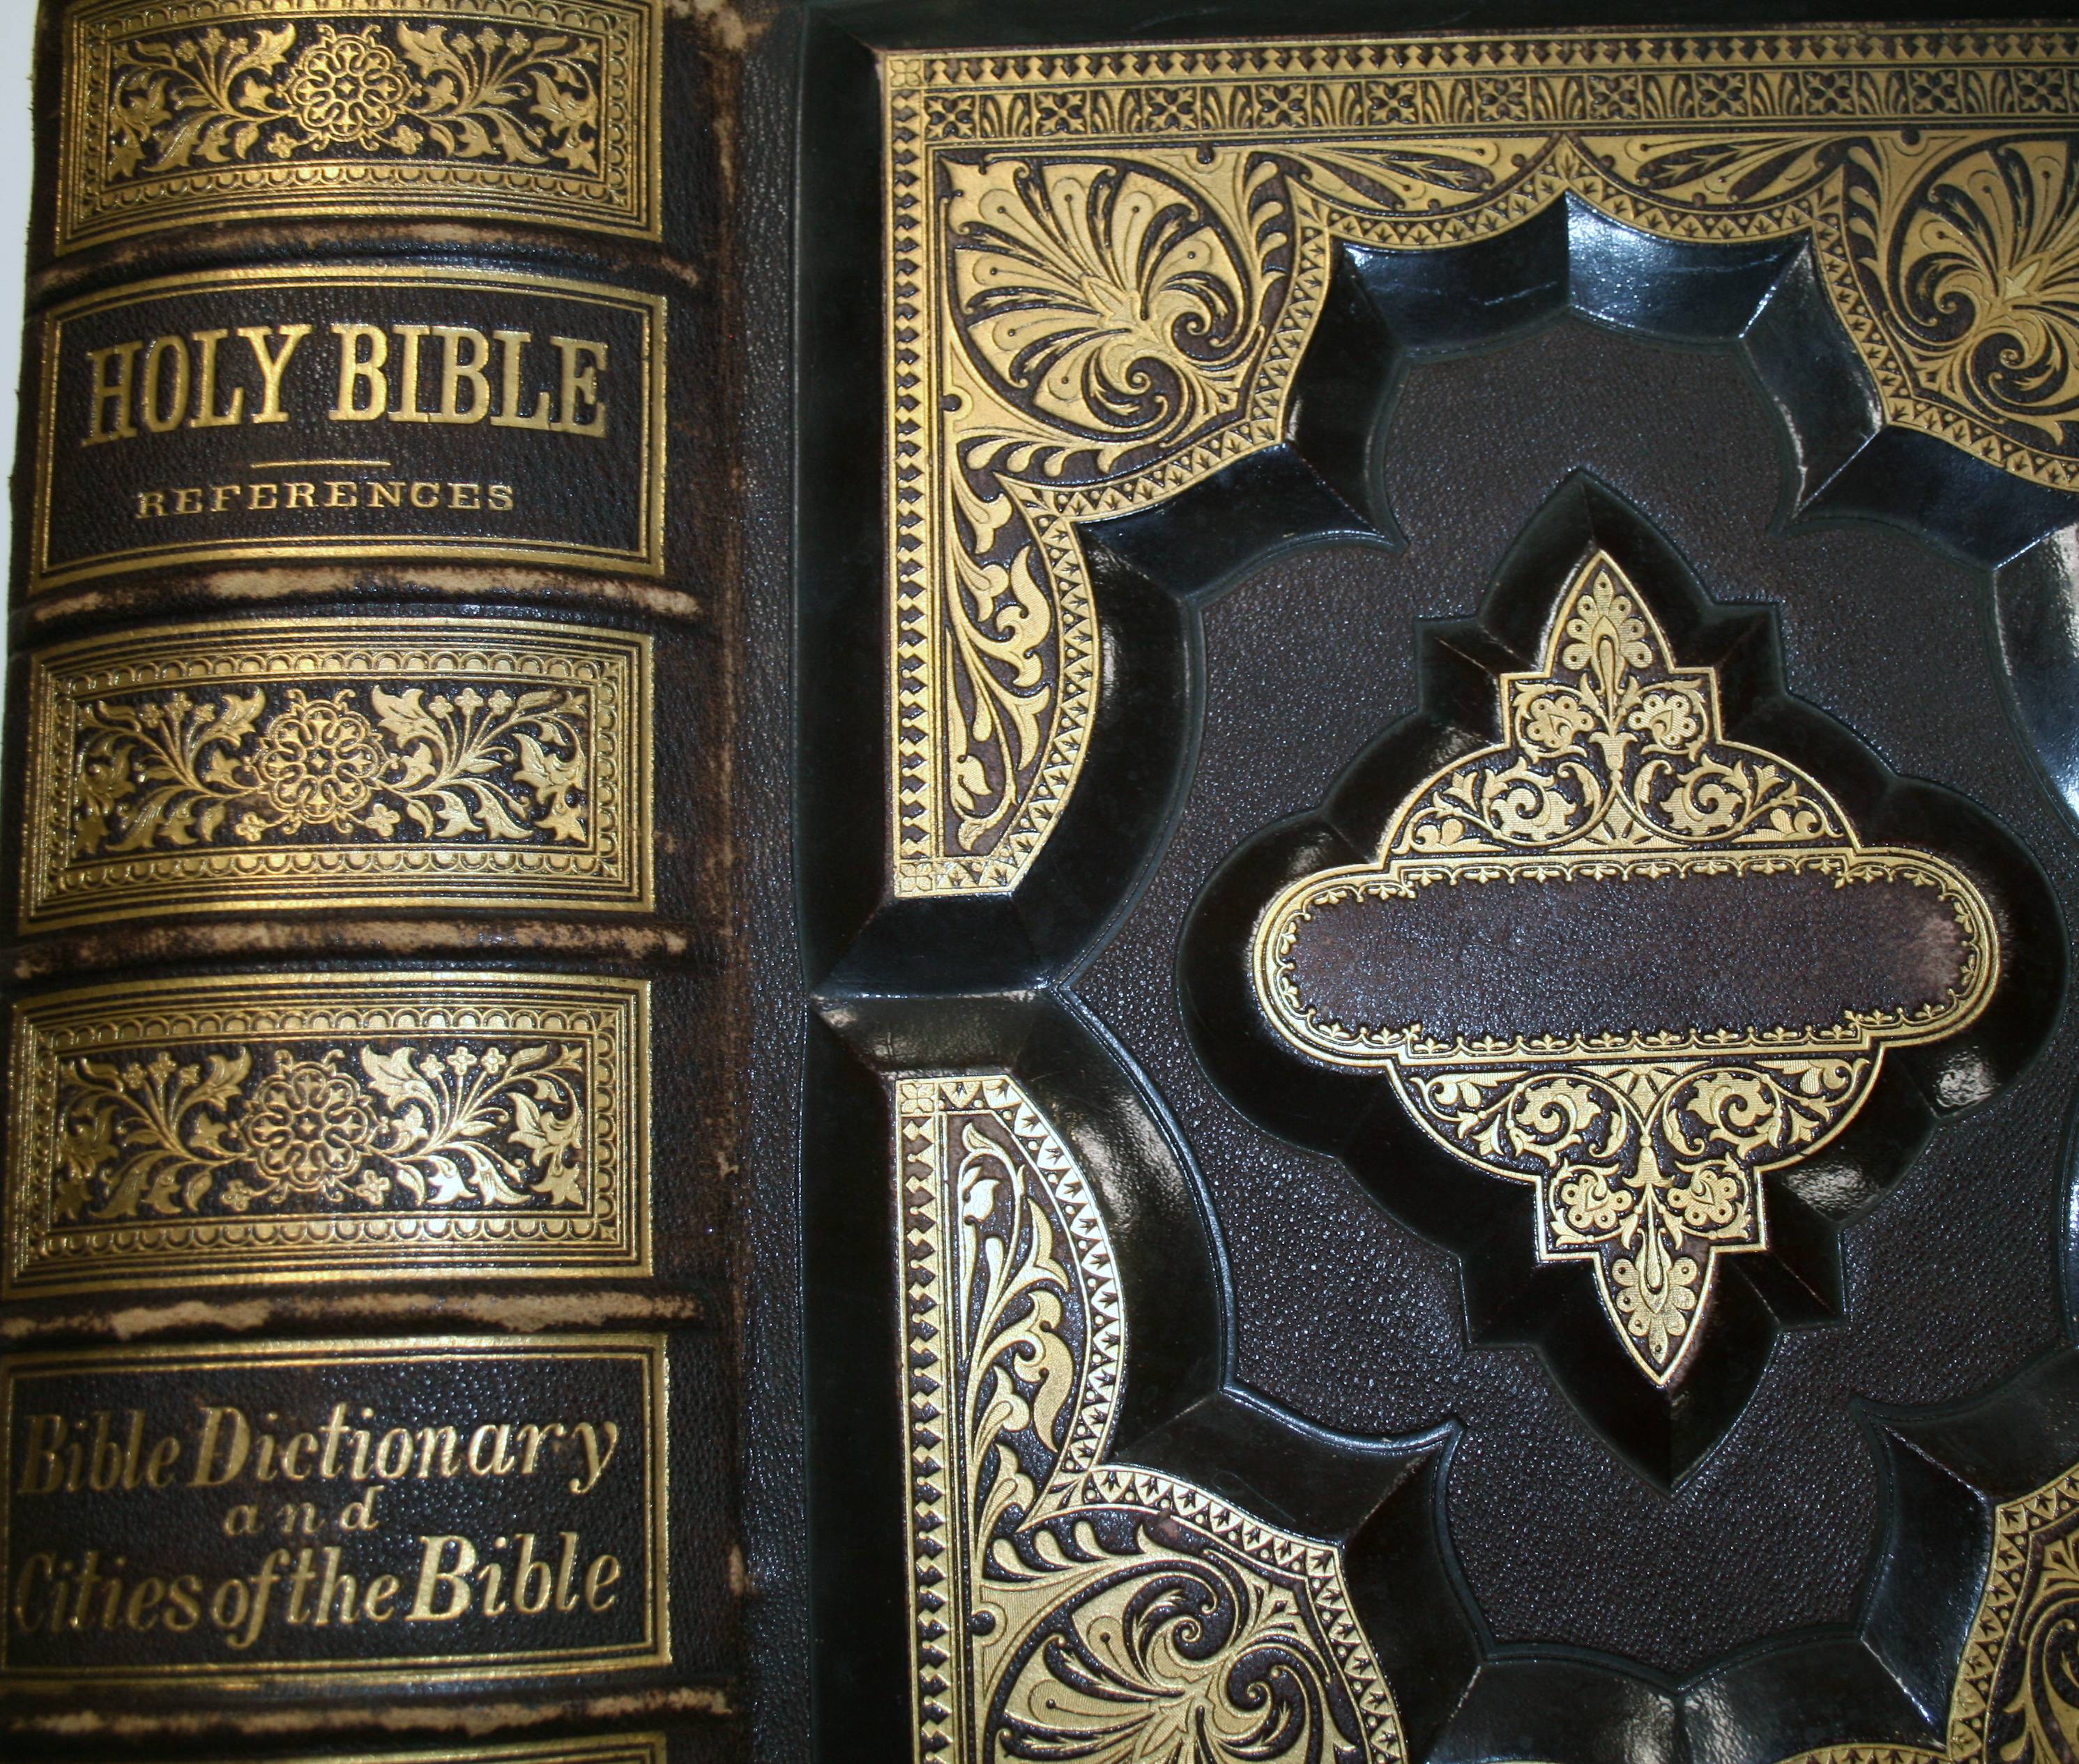 richly bound leather Bible with gold tooling